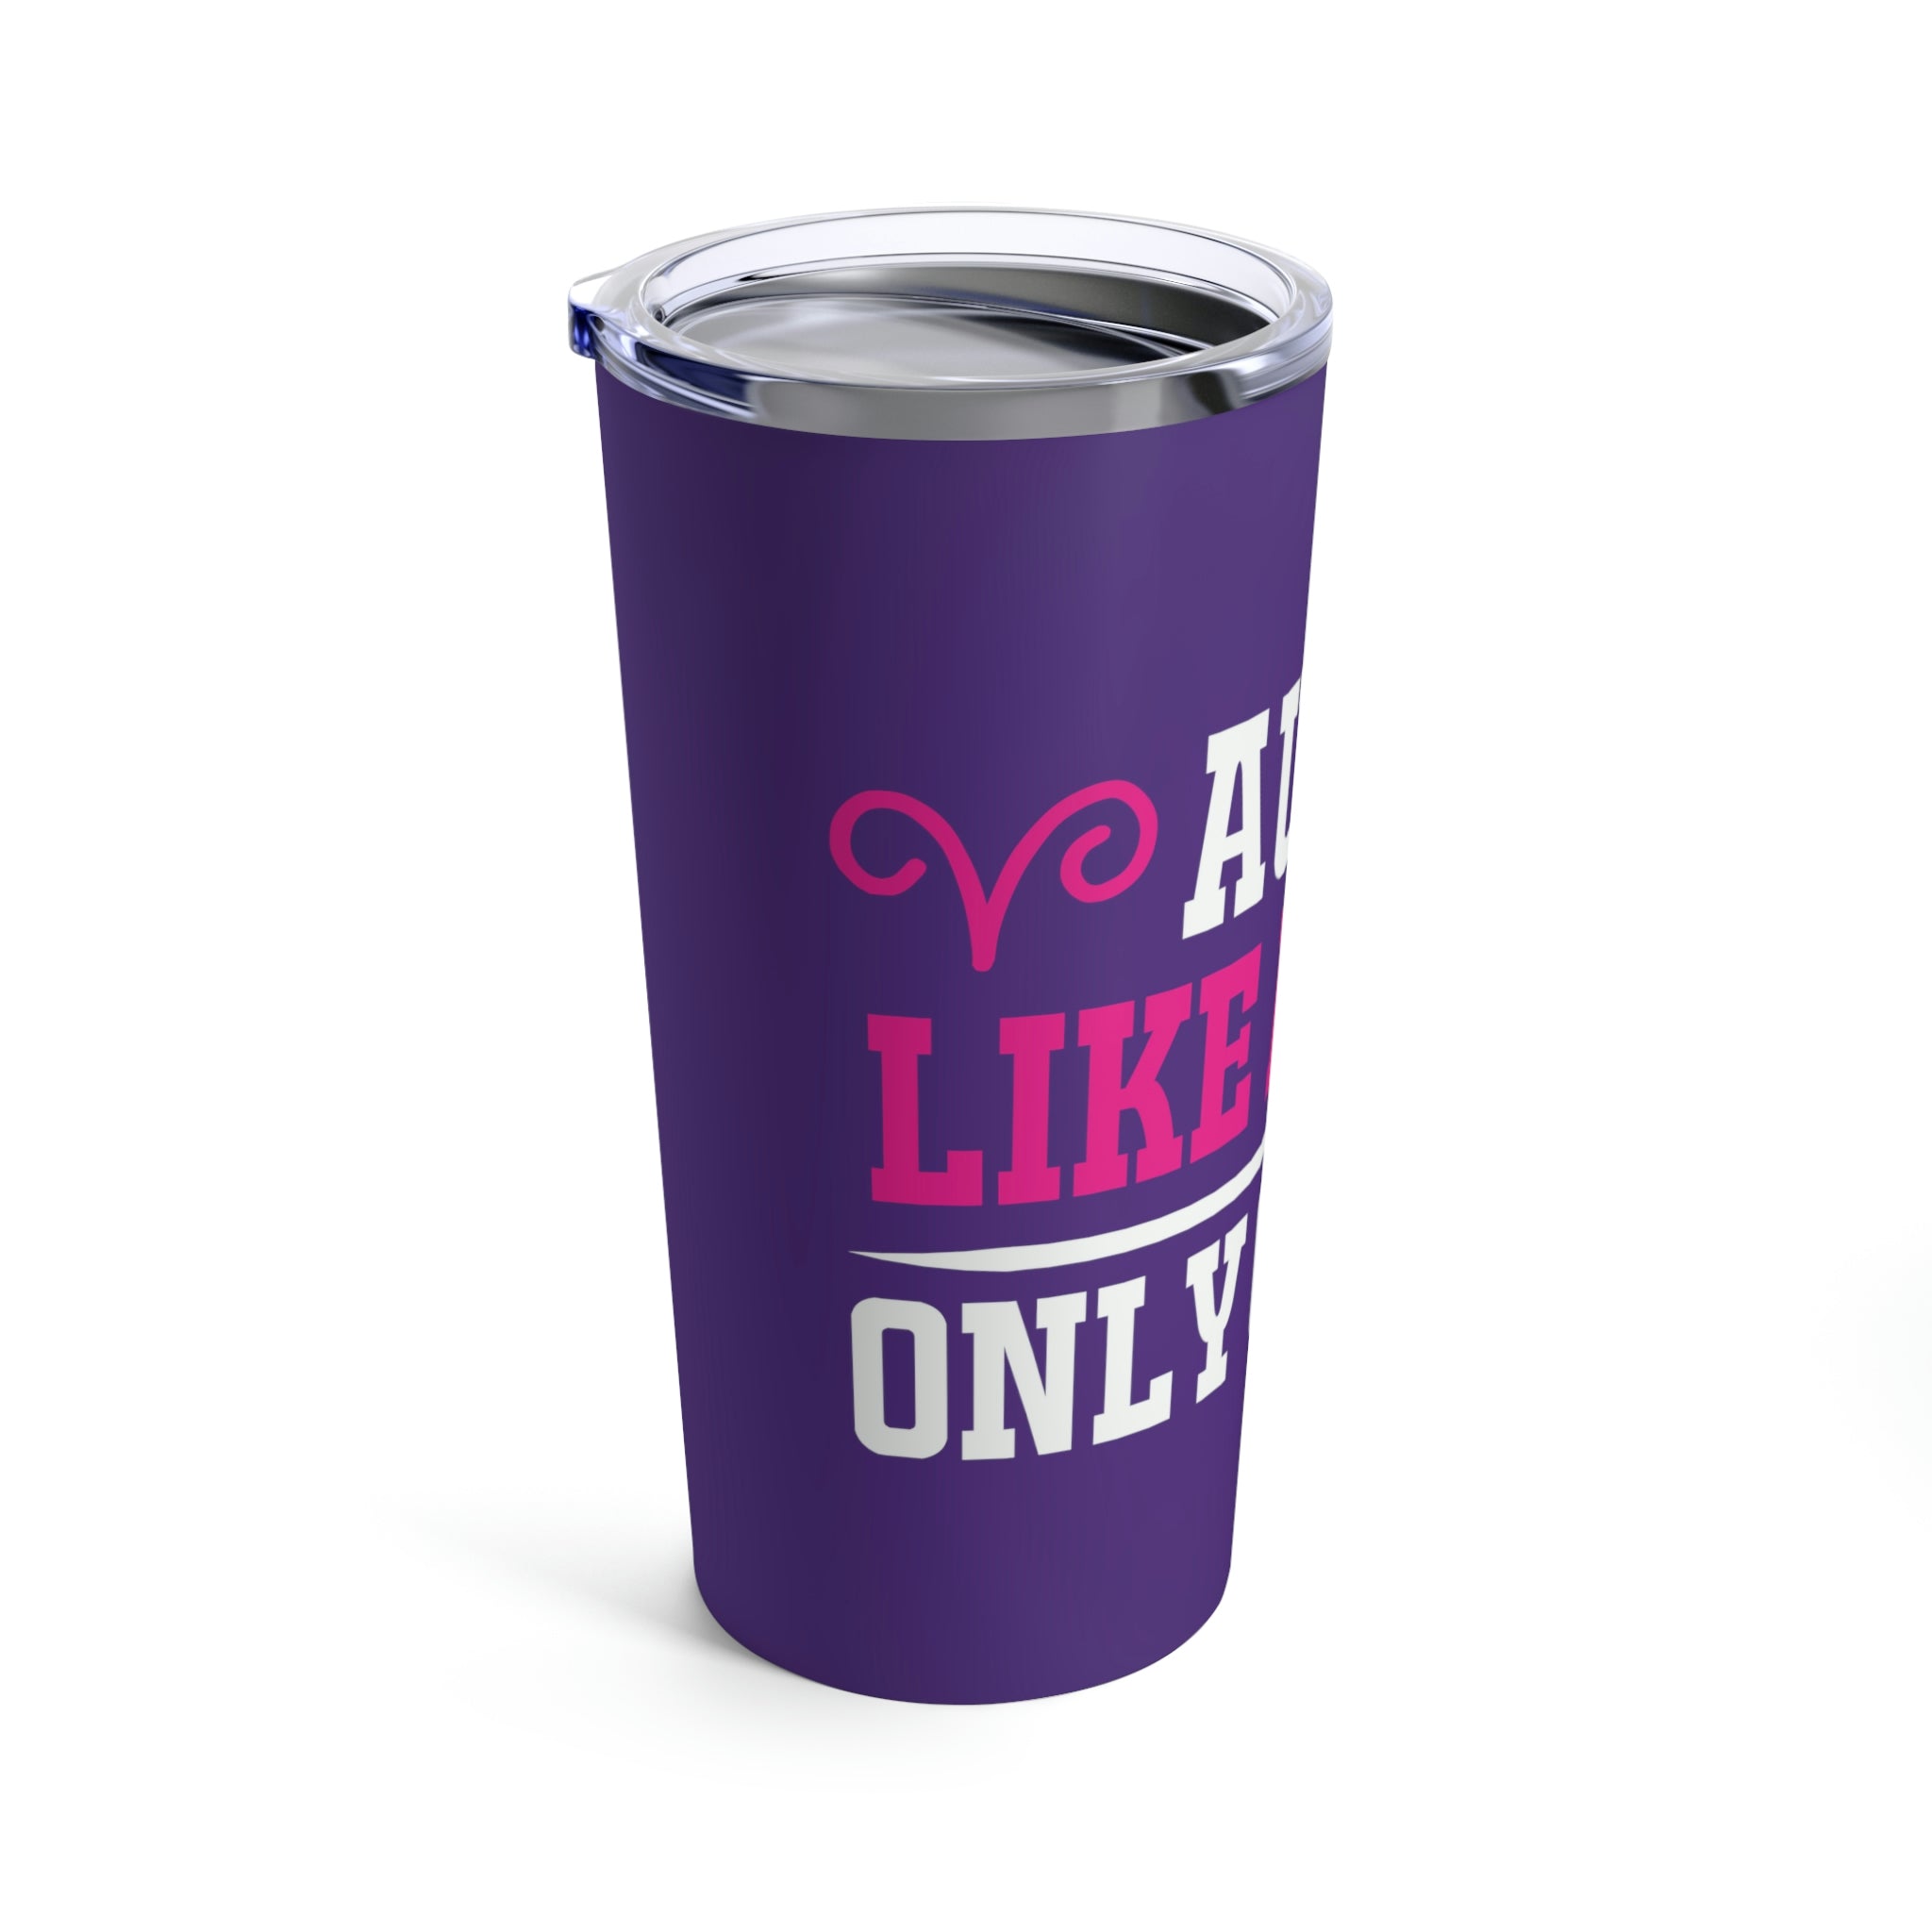 Aunt - Like A Mom Only Cooler Tumbler 20oz